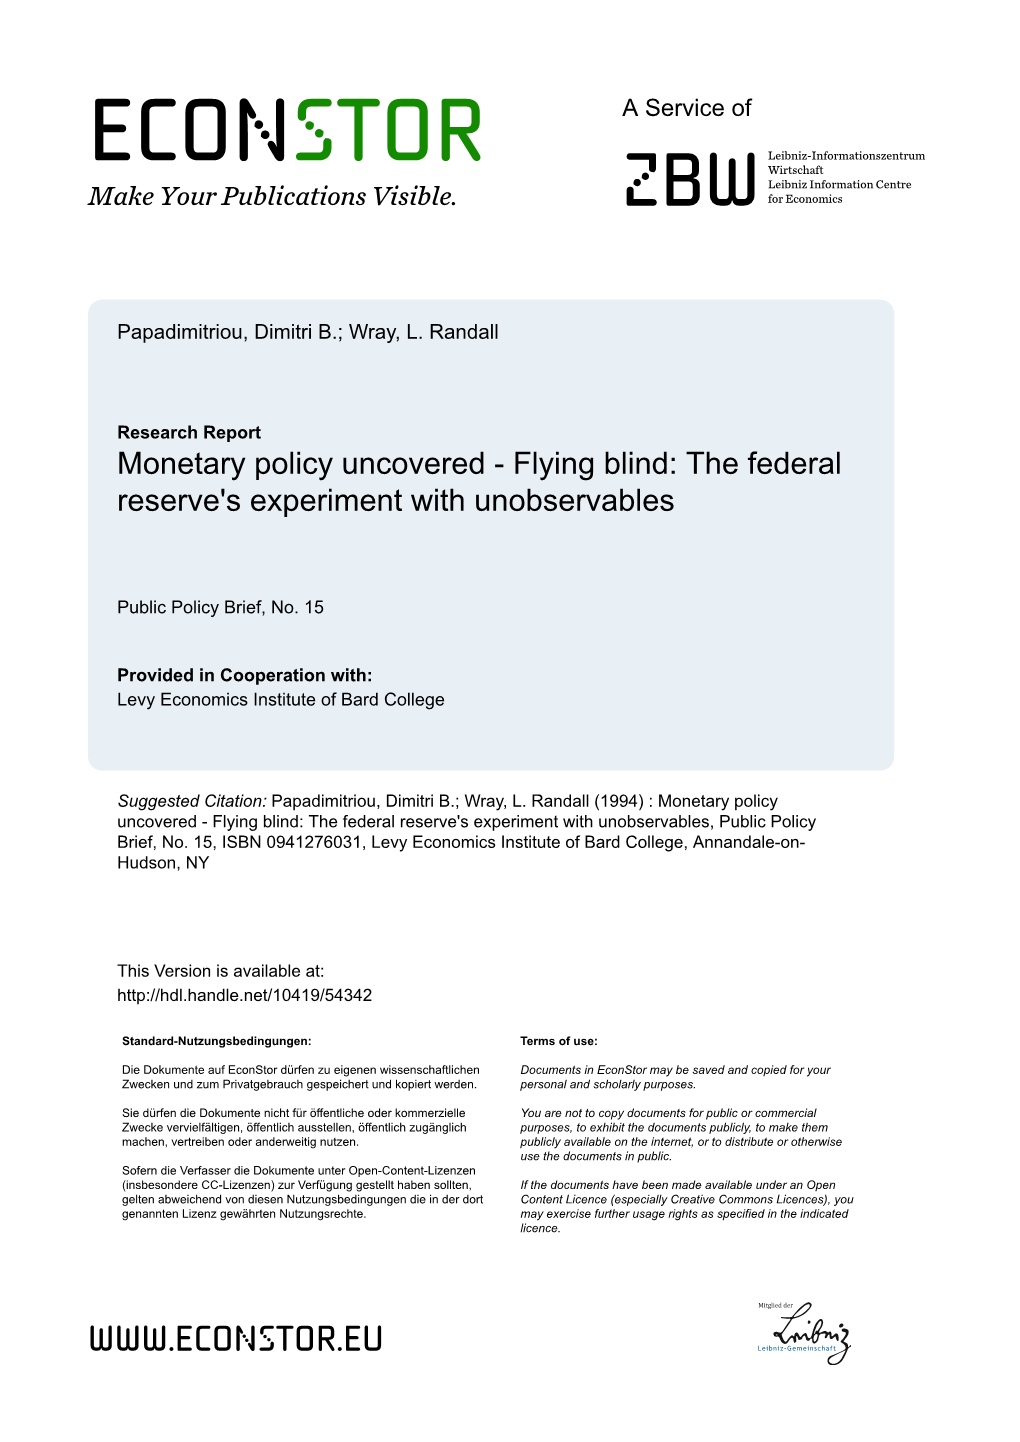 Monetary Policy Uncovered - Flying Blind: the Federal Reserve's Experiment with Unobservables